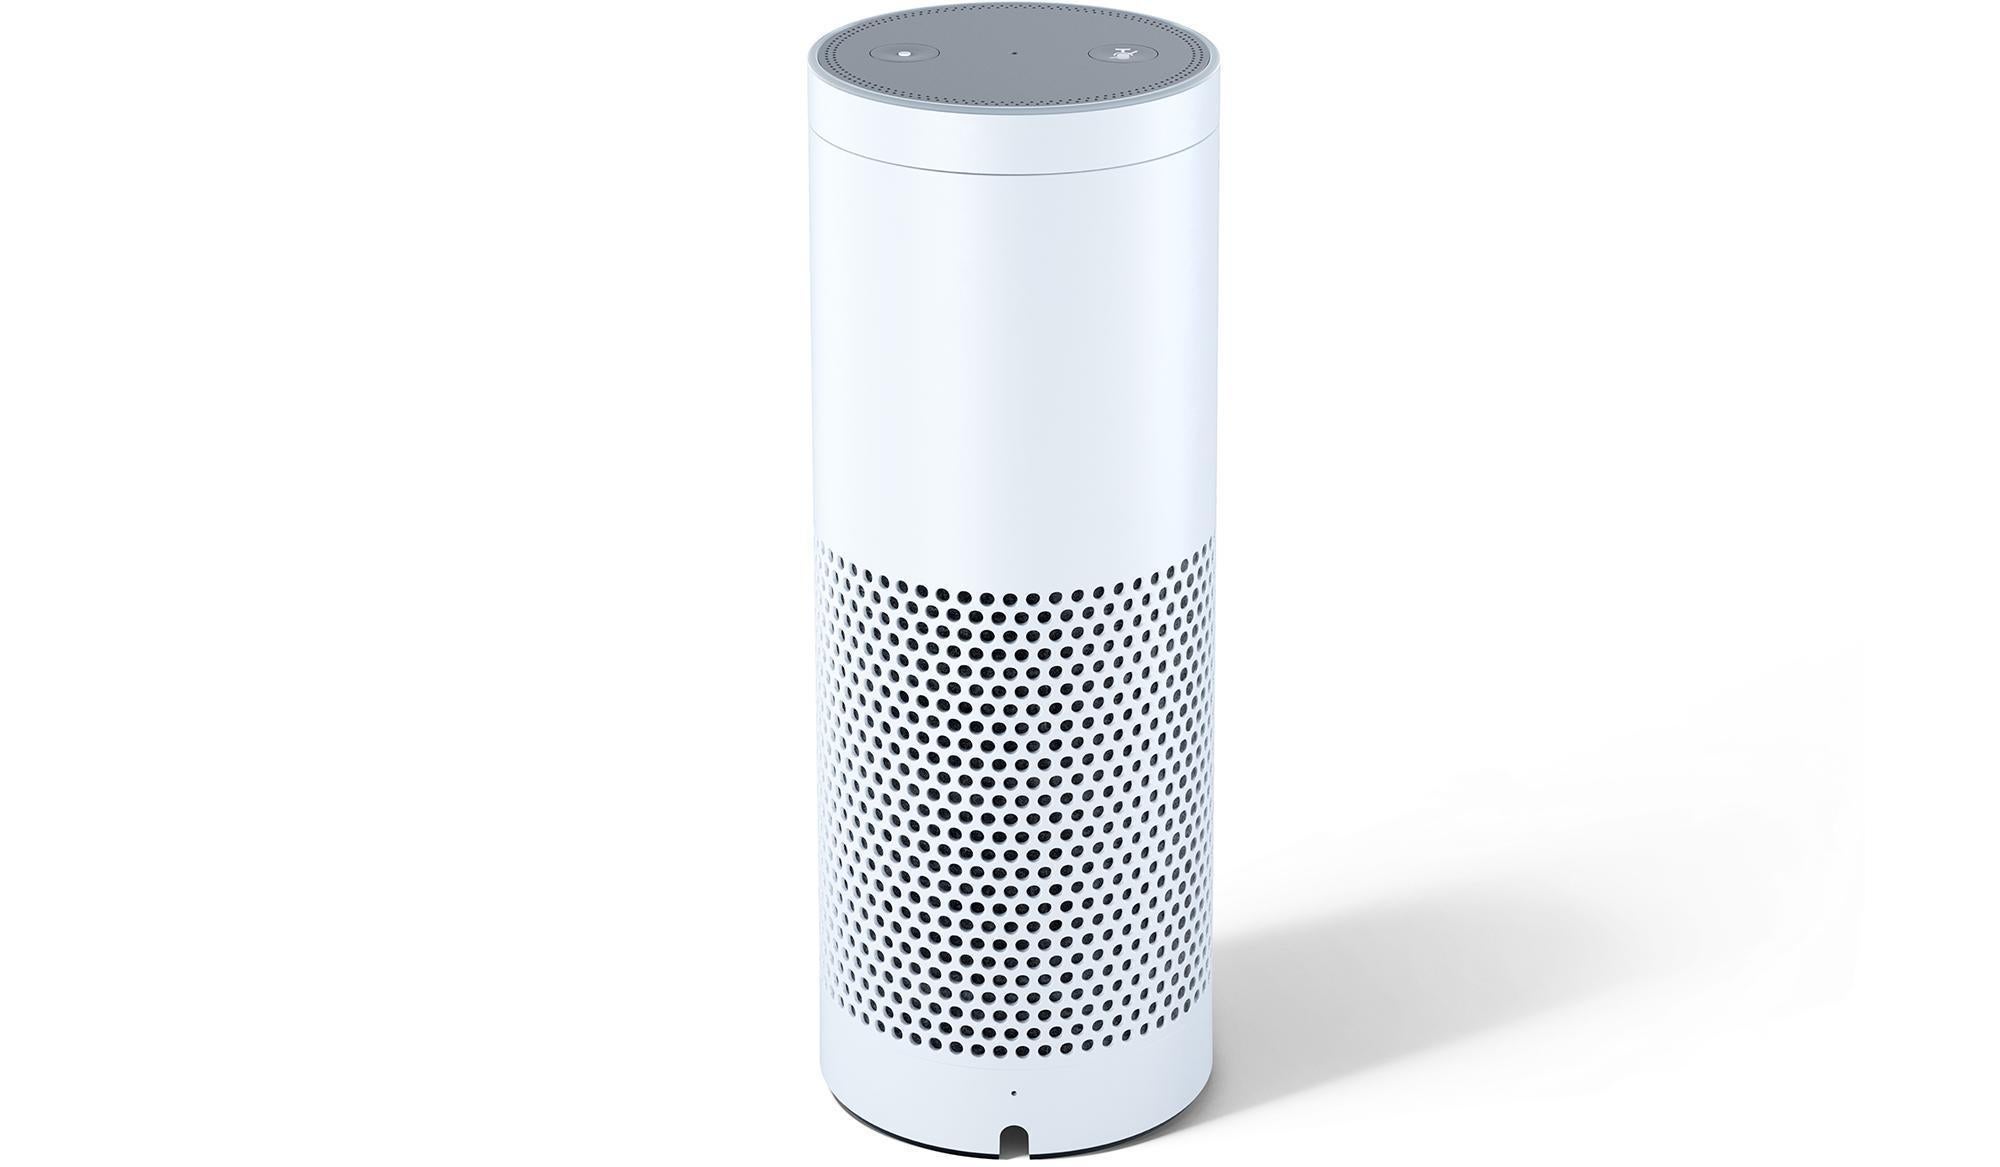 This wireless speaker, £149.99, does so much more than stream music from your phone, tablet or laptop. It has Amazon Alexa built in for voice control. It will read messages out loud to you, and if you ask it what the weather or traffic is like, it reads you a local report. You can place Amazon shopping orders — by voice, obviously. You can even control smart home appliances with vocal commands. > Buy it now